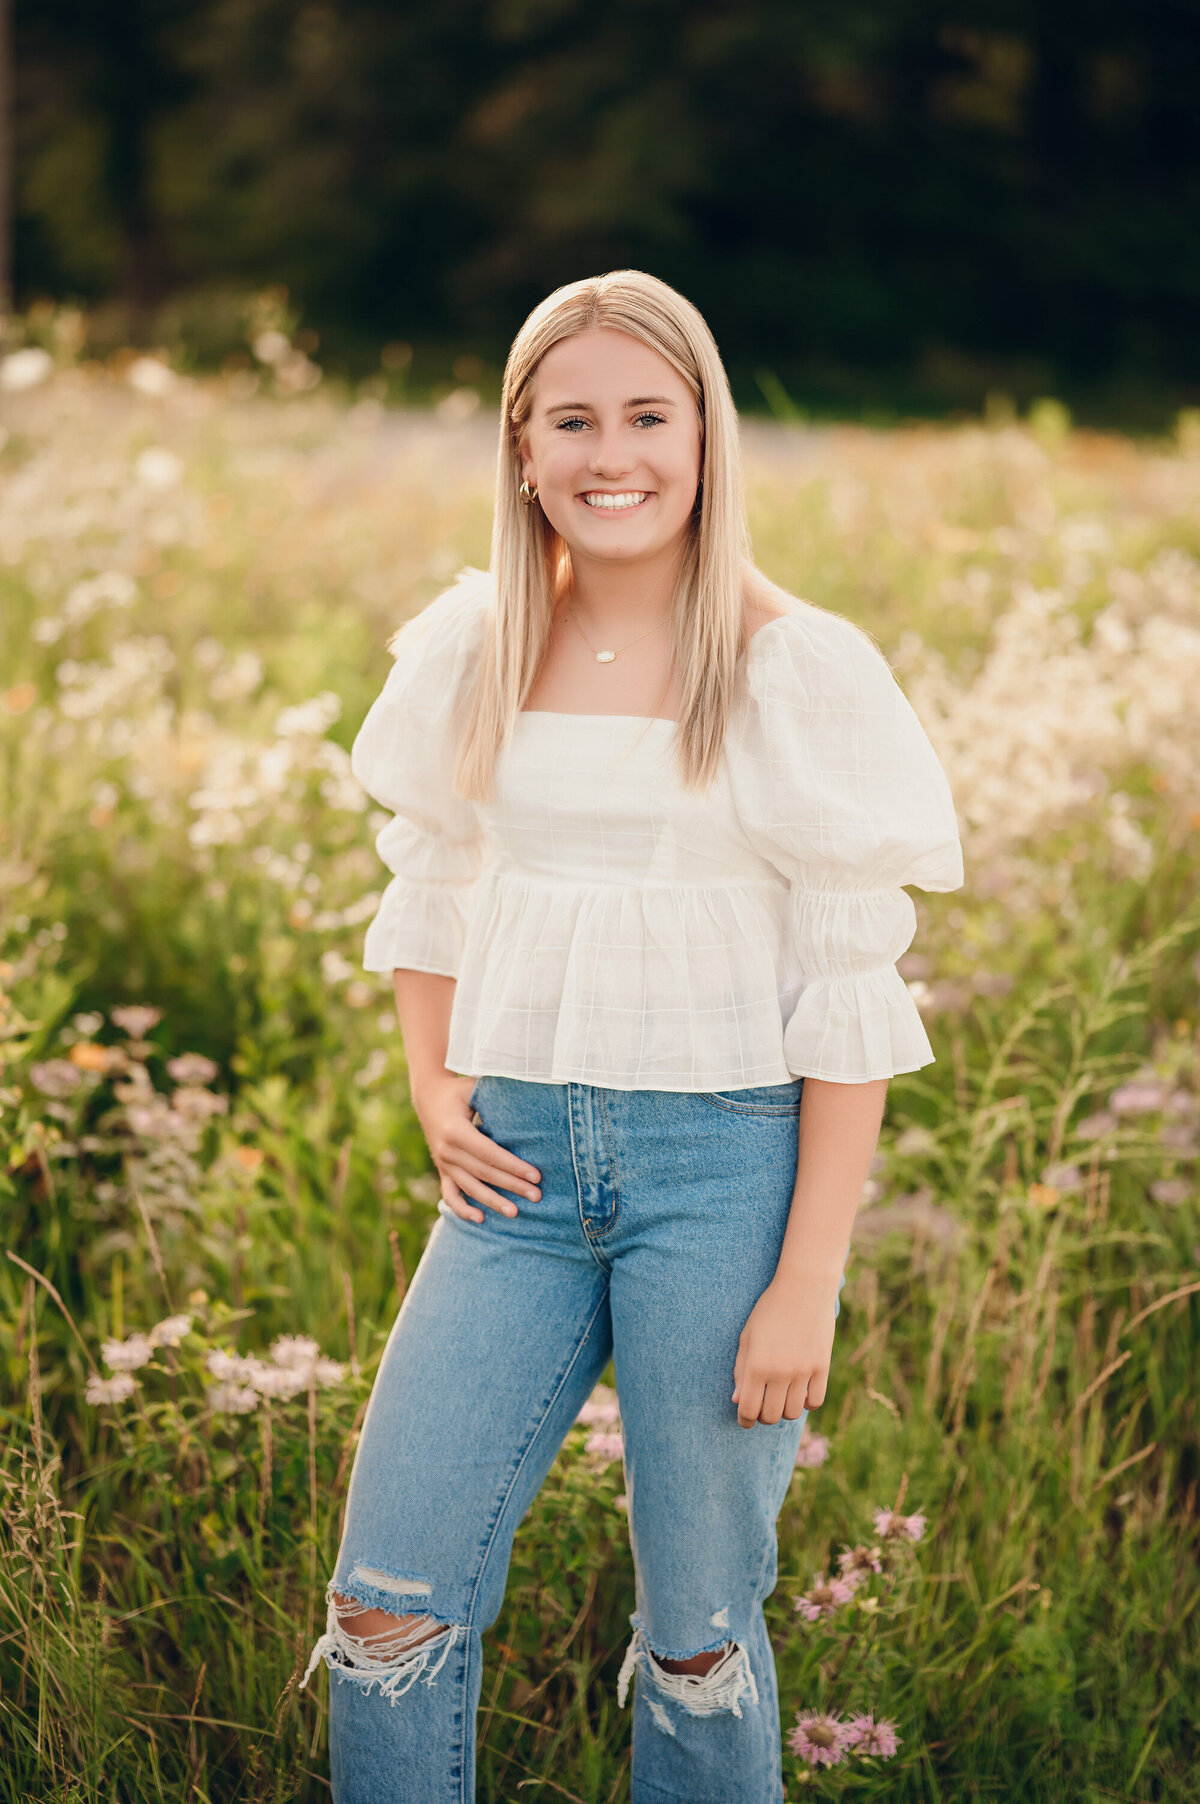 A Waukesha North High School student stands in field of wildflowers at Frame Park during her senior photoshoot.